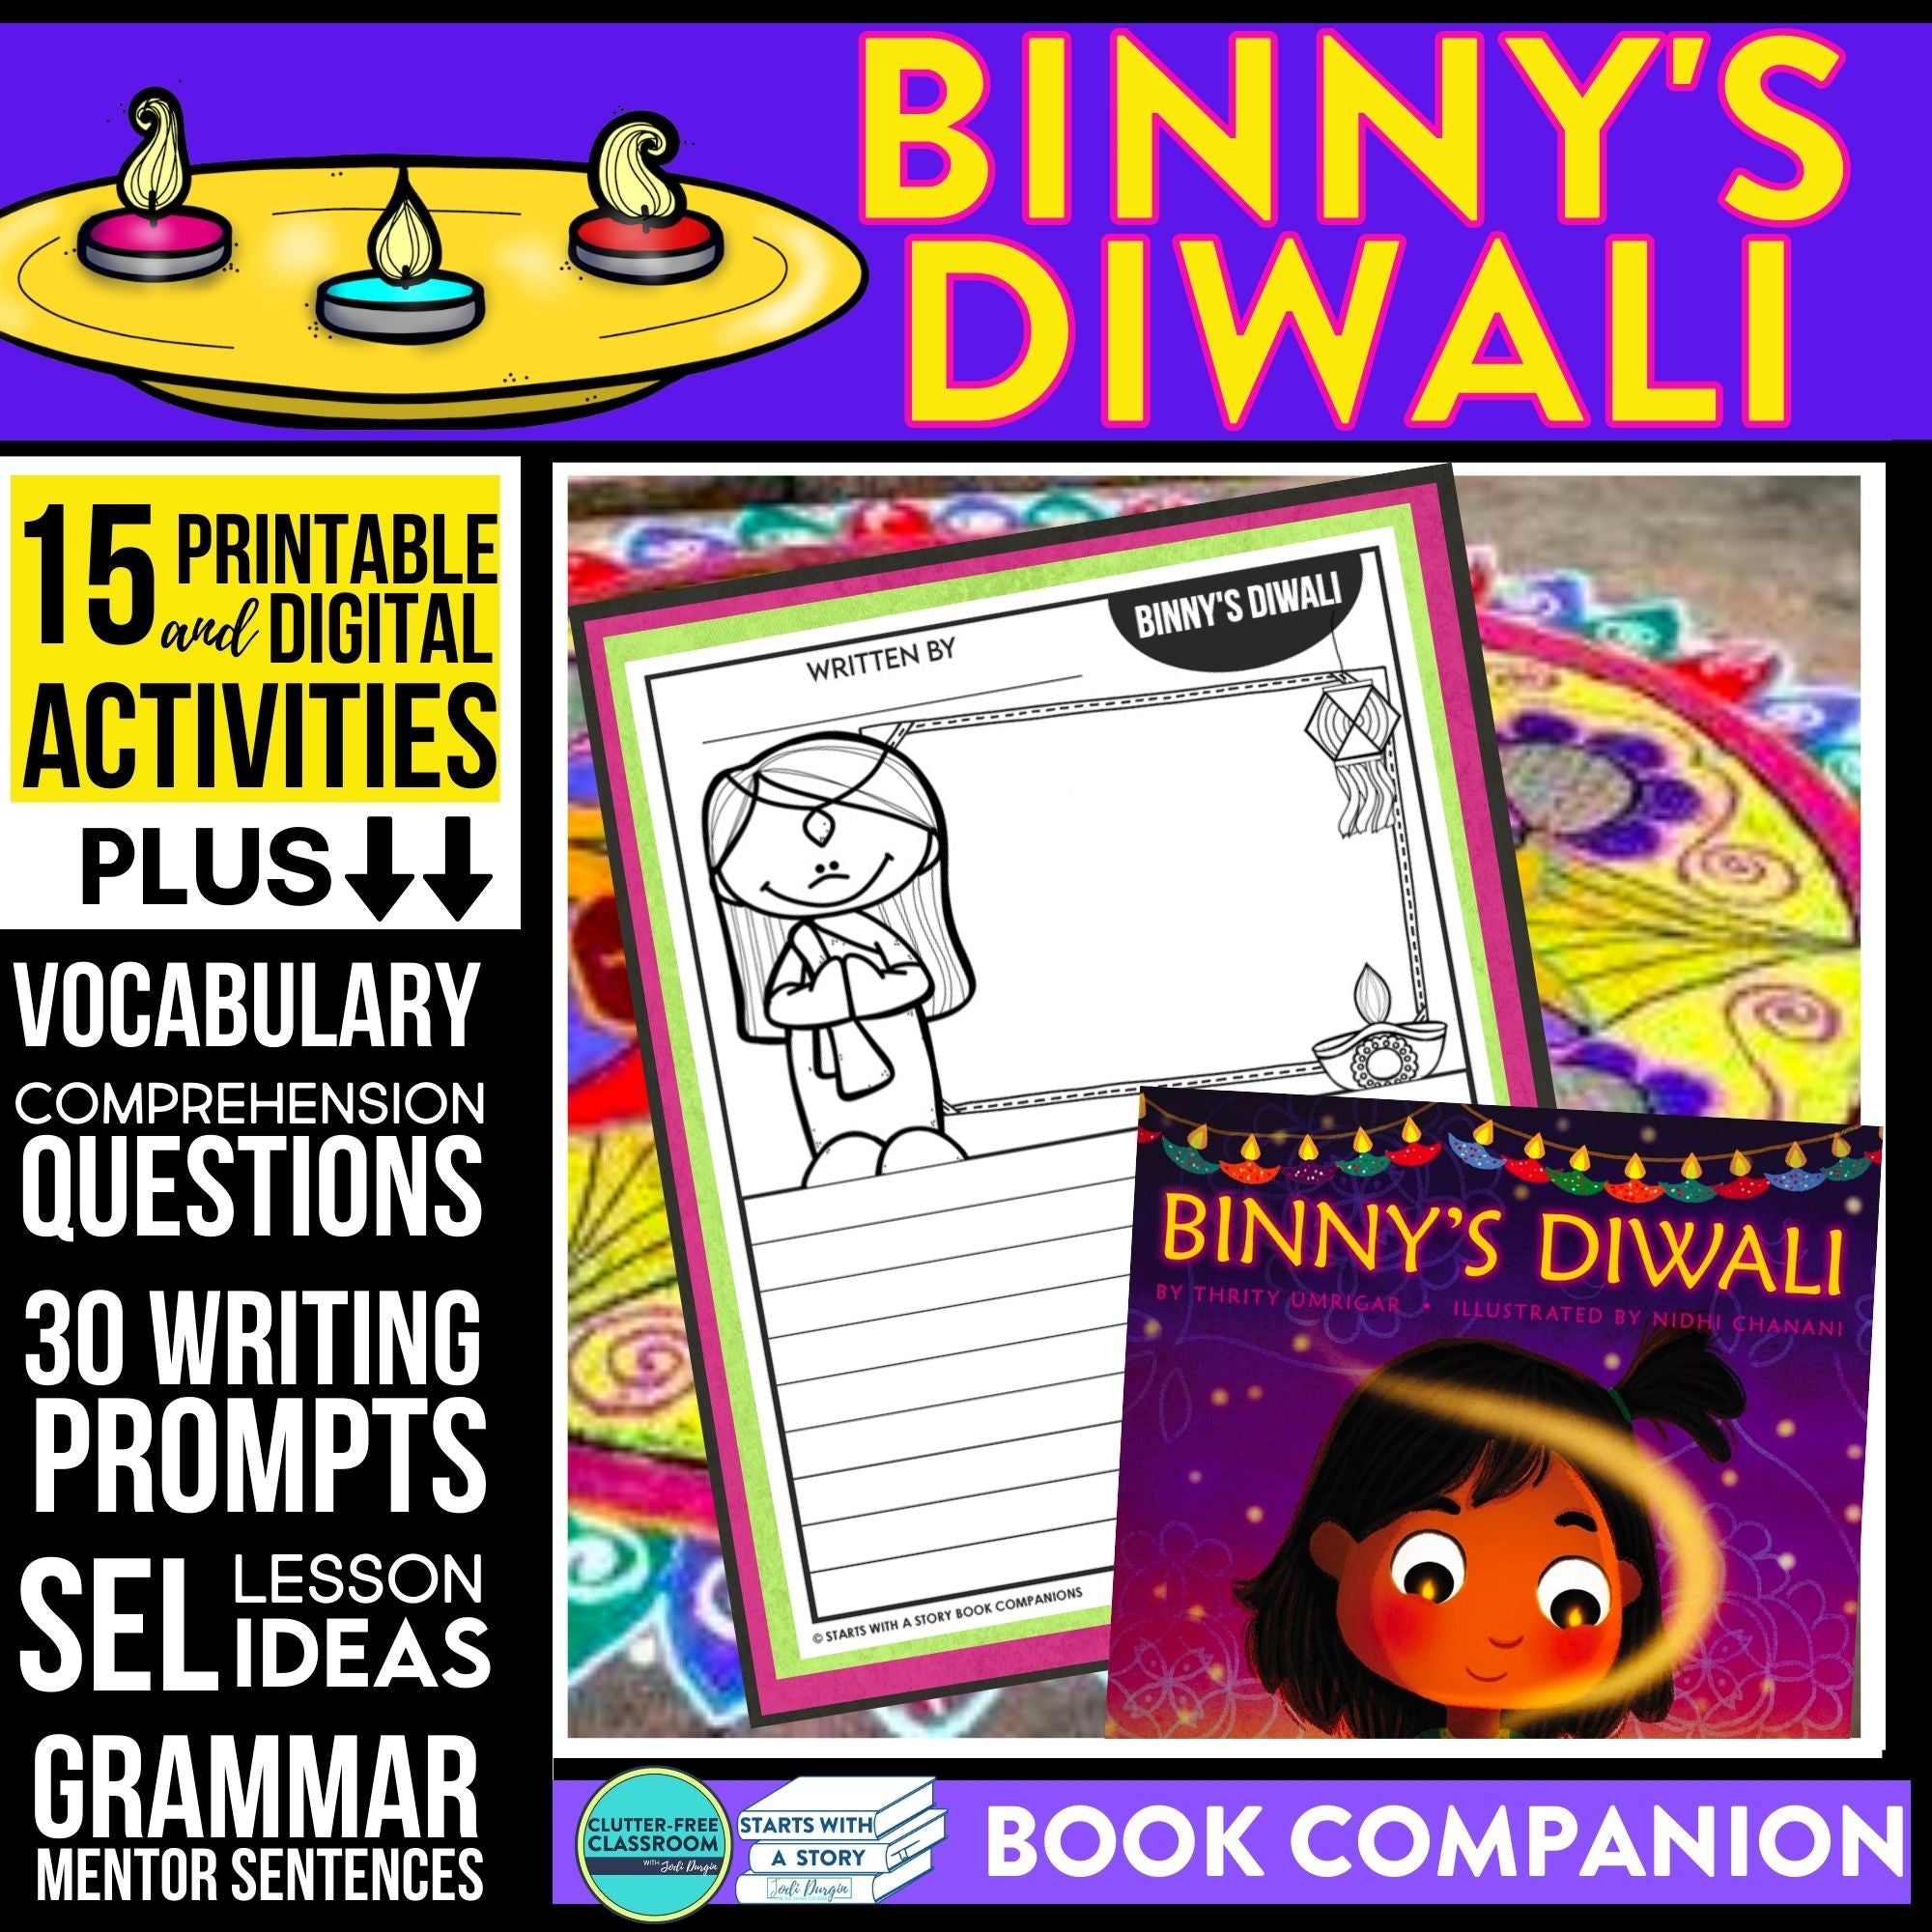 BINNY'S DIWALI activities and lesson plan ideas